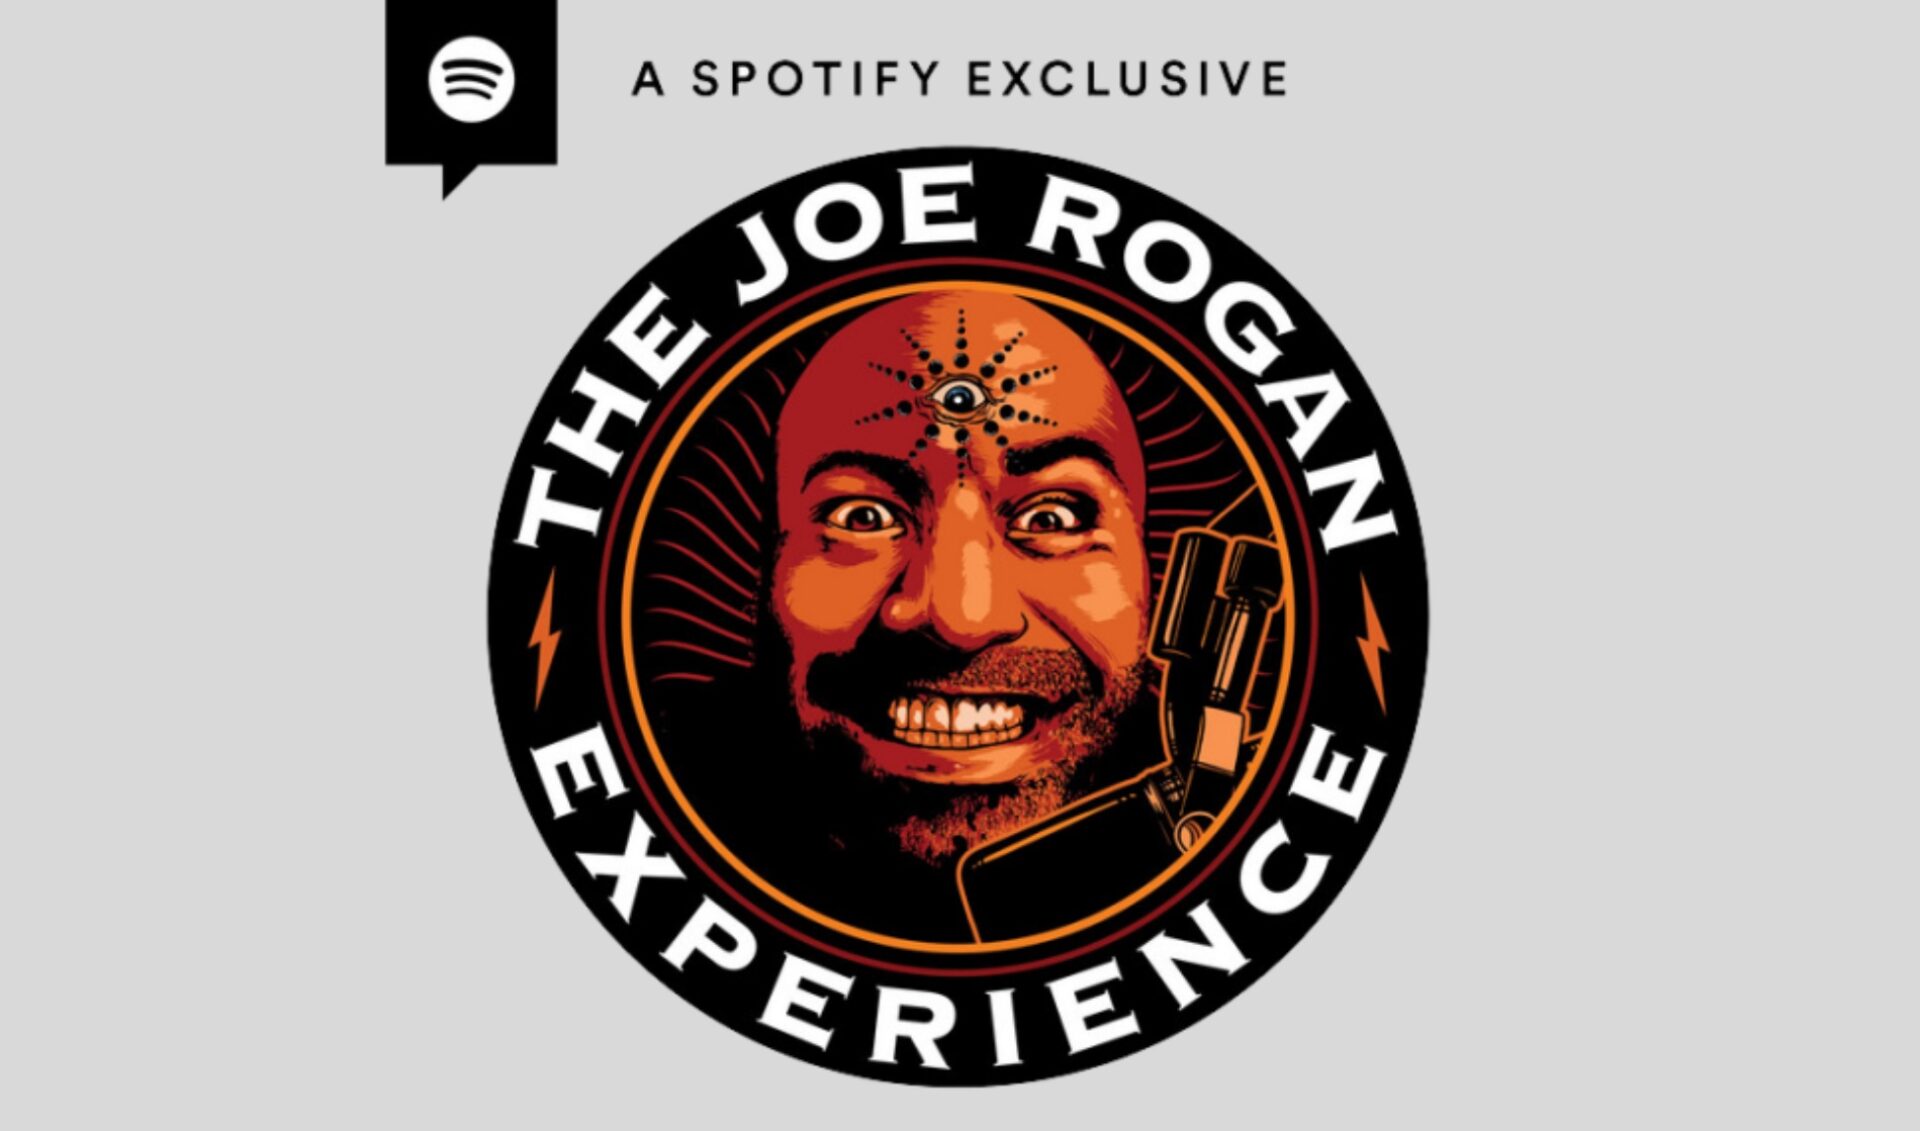 Joe Rogan has 14.5 million Spotify followers, nearly three times more than any other podcaster